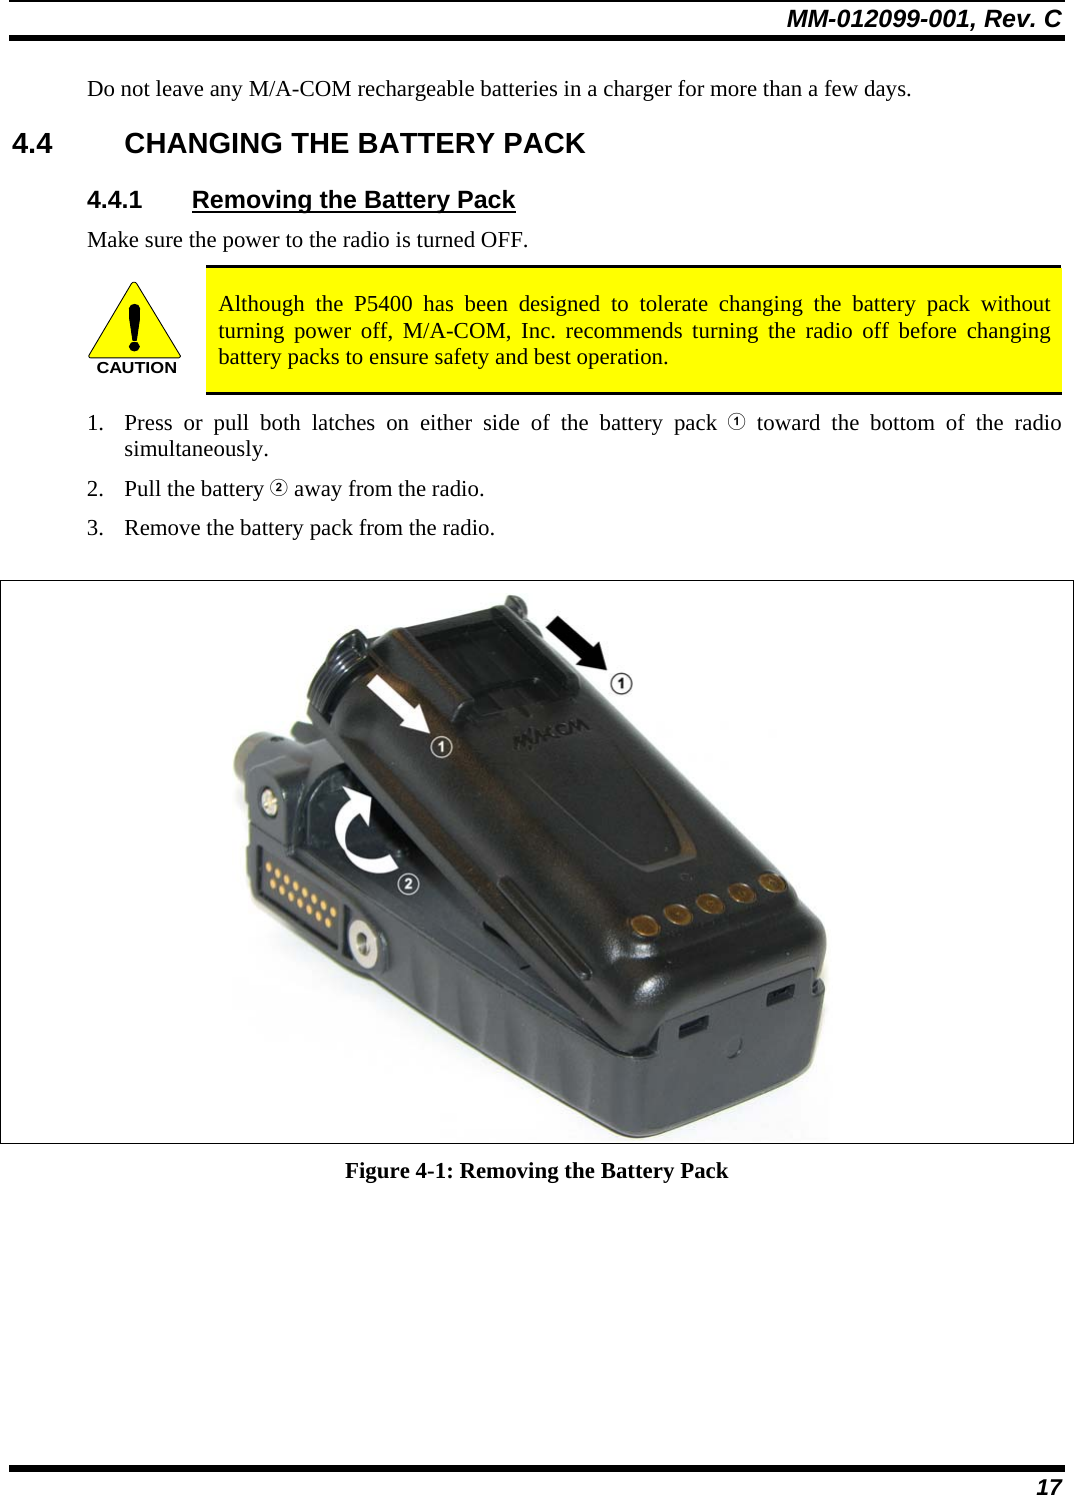 MM-012099-001, Rev. C 17 Do not leave any M/A-COM rechargeable batteries in a charger for more than a few days.  4.4  CHANGING THE BATTERY PACK 4.4.1  Removing the Battery Pack Make sure the power to the radio is turned OFF. CAUTION Although the P5400 has been designed to tolerate changing the battery pack without turning power off, M/A-COM, Inc. recommends turning the radio off before changing battery packs to ensure safety and best operation. 1. Press or pull both latches on either side of the battery pack  toward the bottom of the radio simultaneously.  2. Pull the battery  away from the radio. 3. Remove the battery pack from the radio.   Figure 4-1: Removing the Battery Pack 